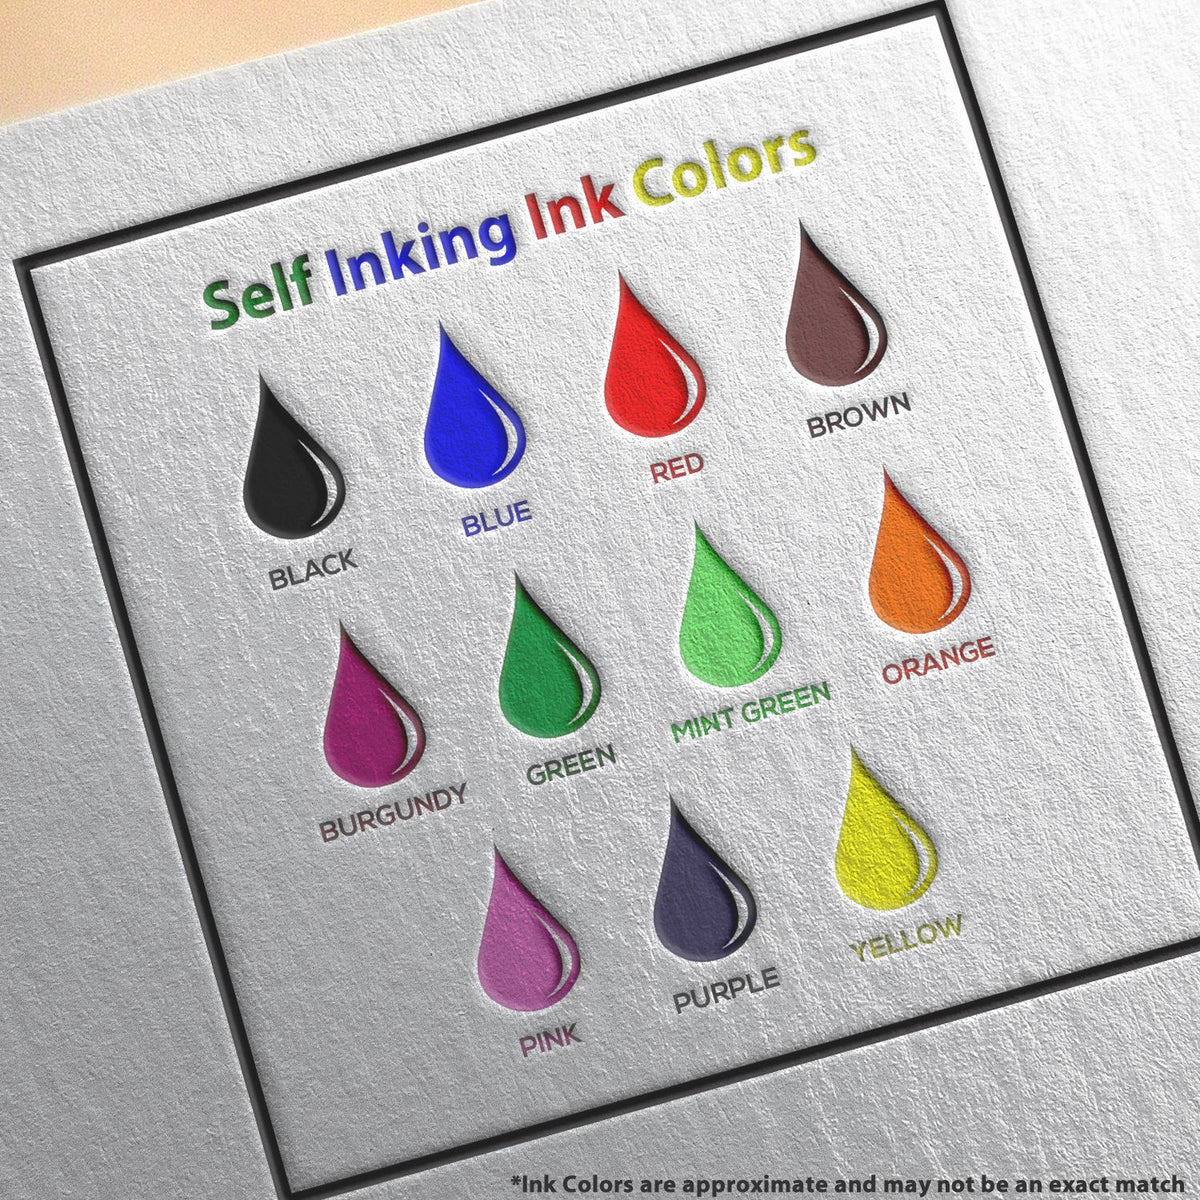 A picture showing the different ink colors or hues available for the Self-Inking Arkansas PE Stamp product.